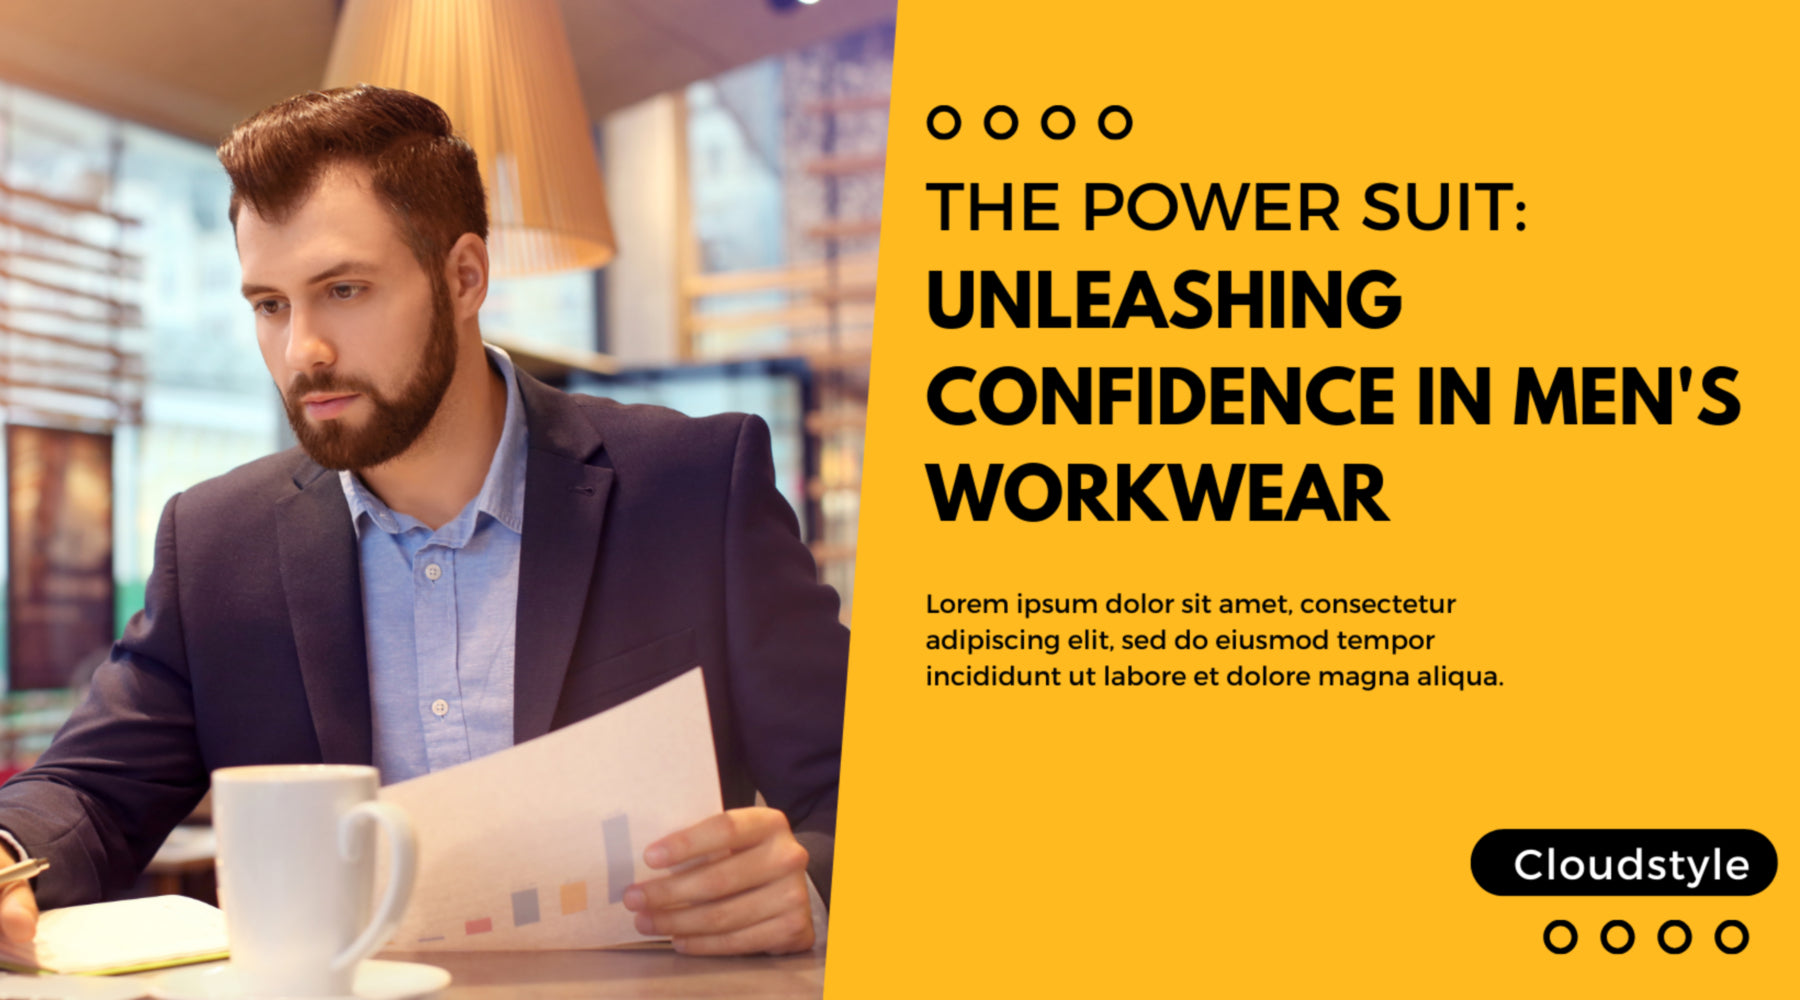 The Power Suit: Unleashing Confidence in Men's Workwear